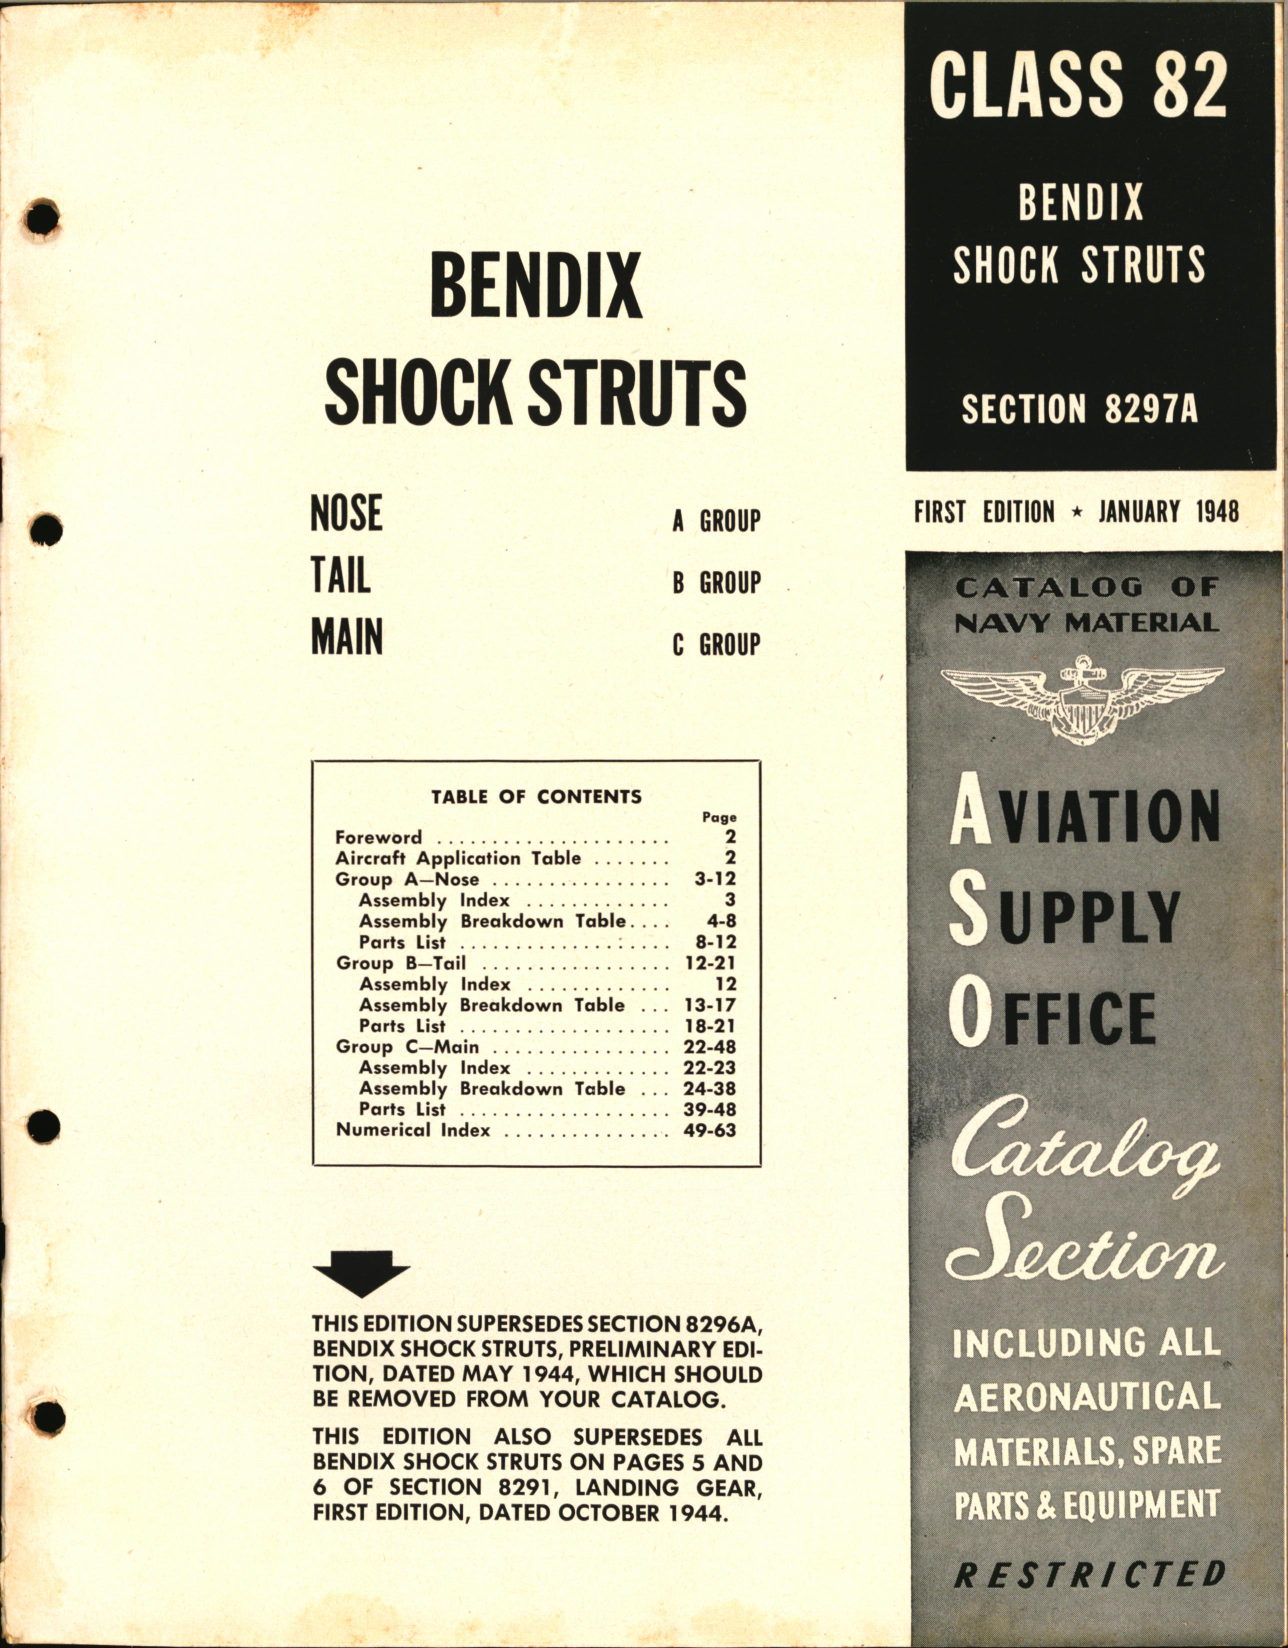 Sample page 1 from AirCorps Library document: Bendix Shock Struts for Nose, Tail, Main